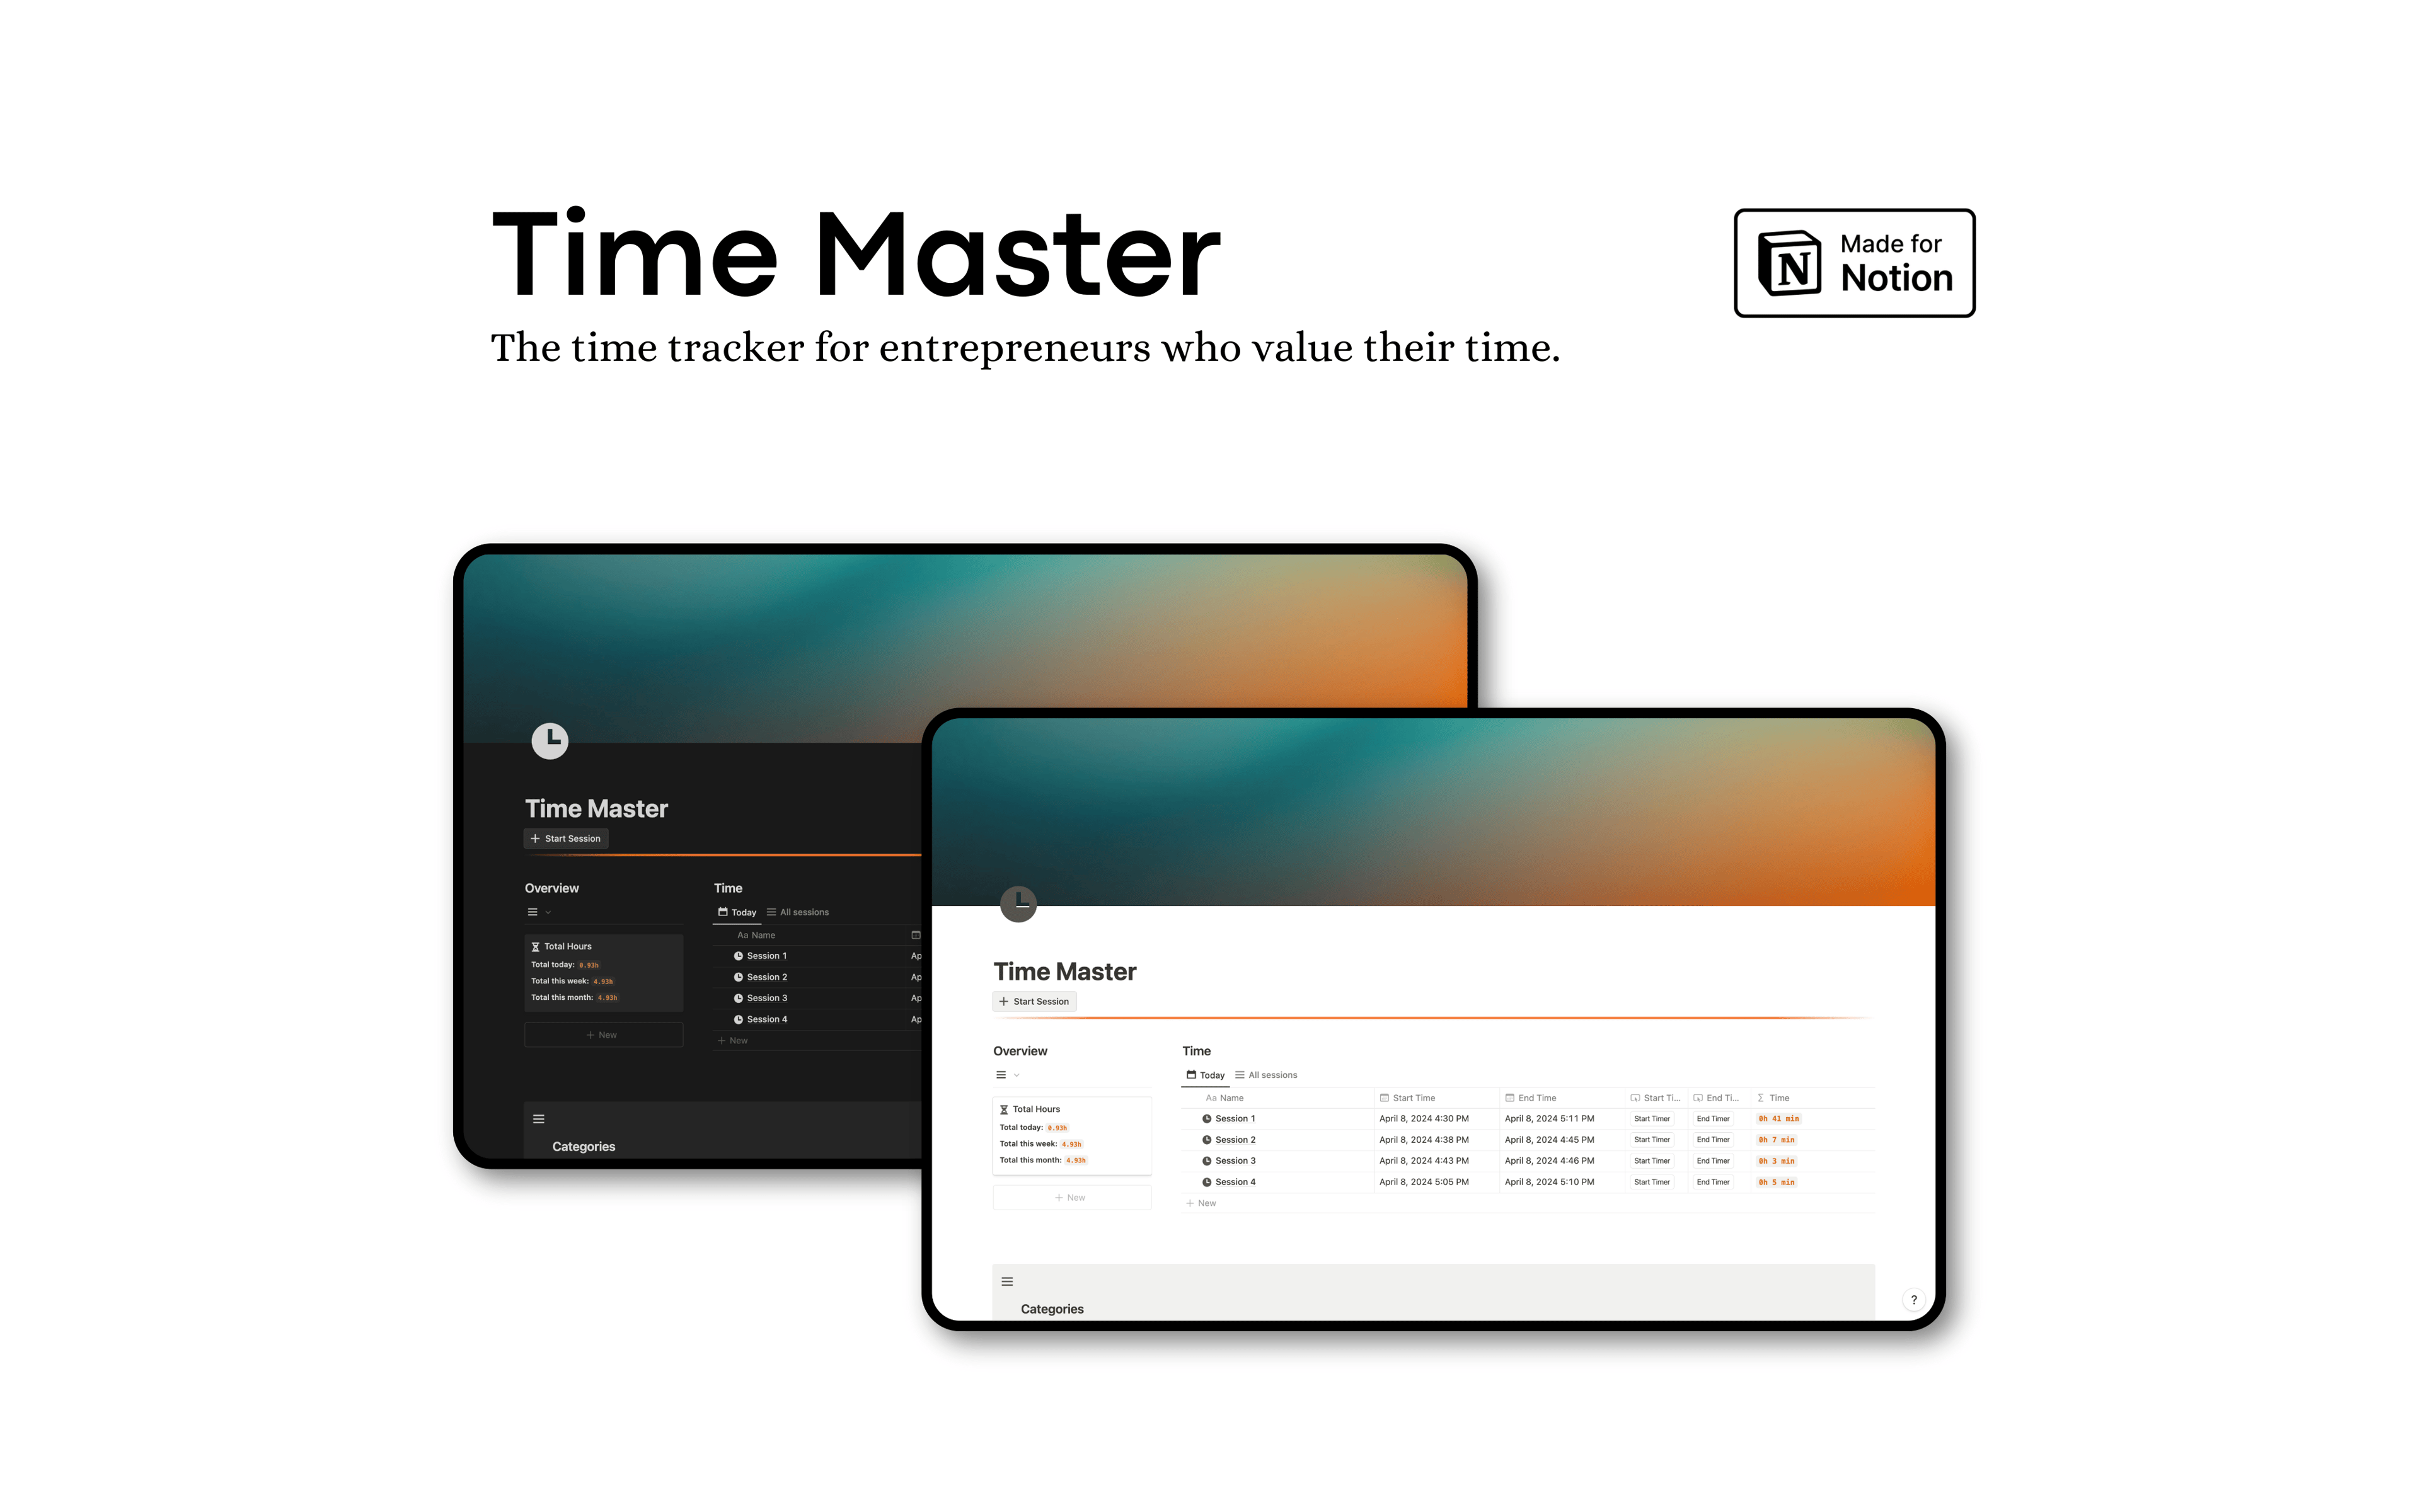 Enhance your time management skills effortlessly with the Time Master. Keep track of your activities, gain insights, and boost productivity like never before.